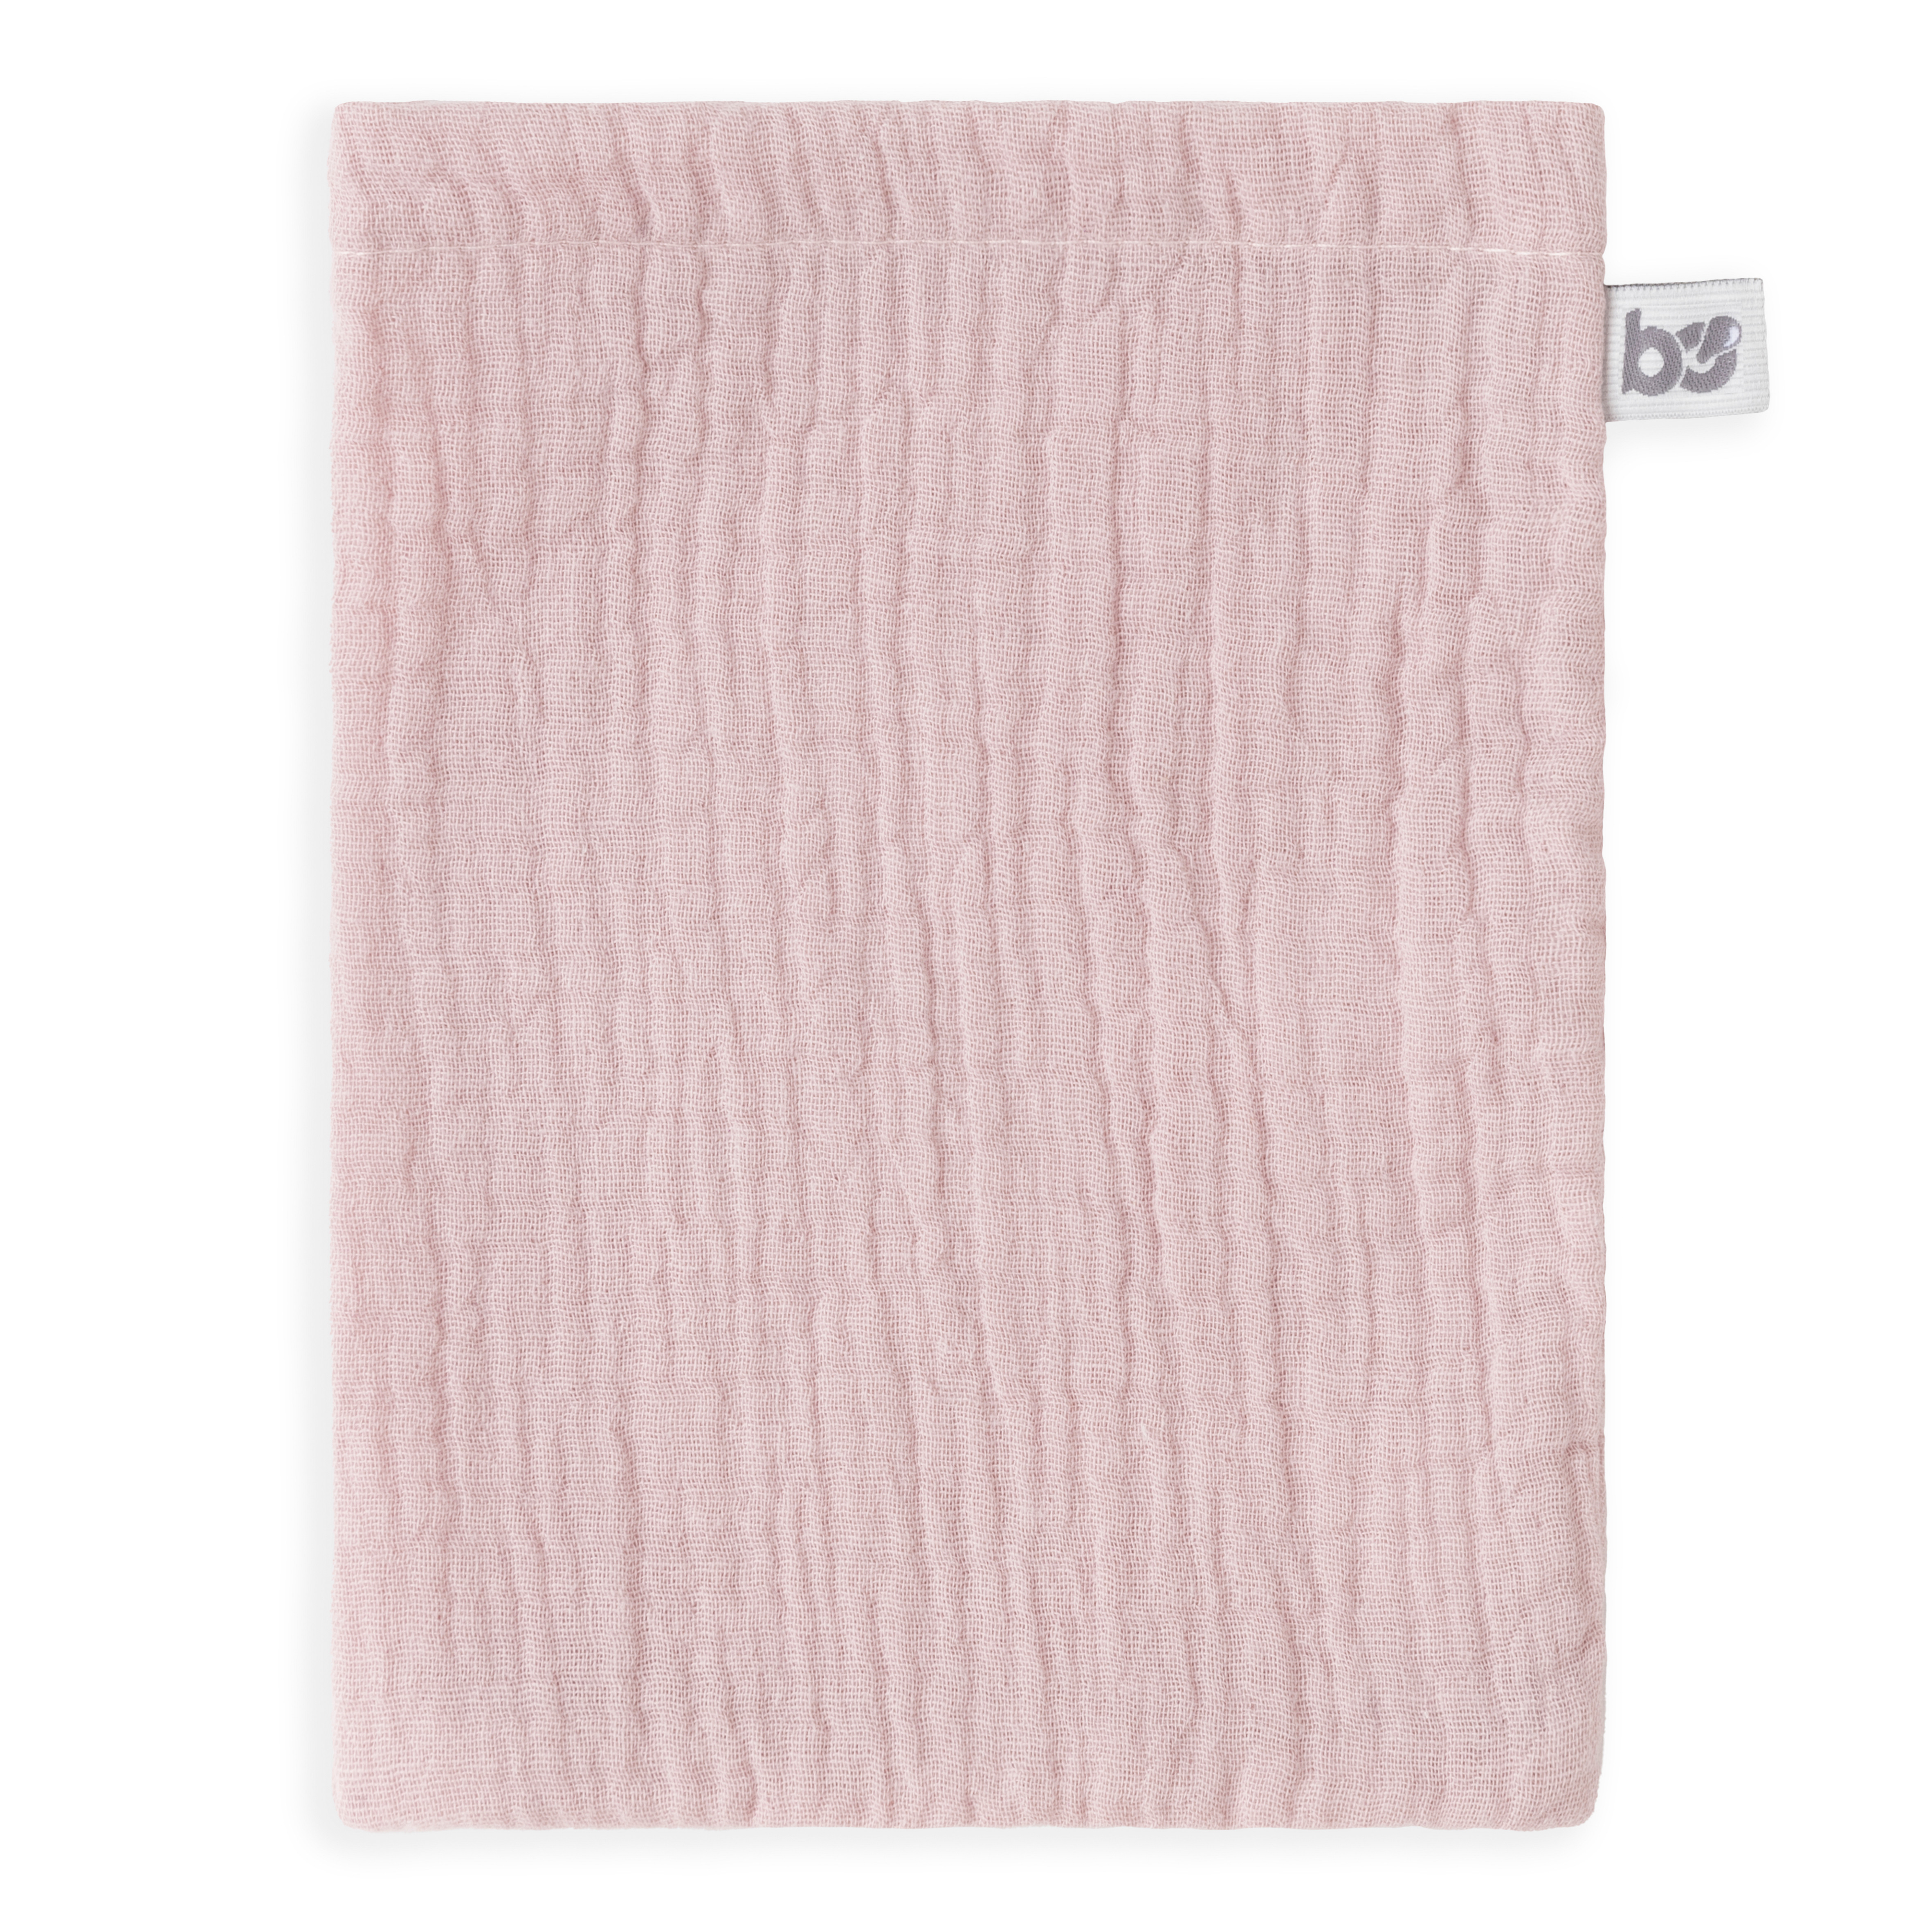 Washcloth Fresh ECO old pink/urban taupe - 3-pack